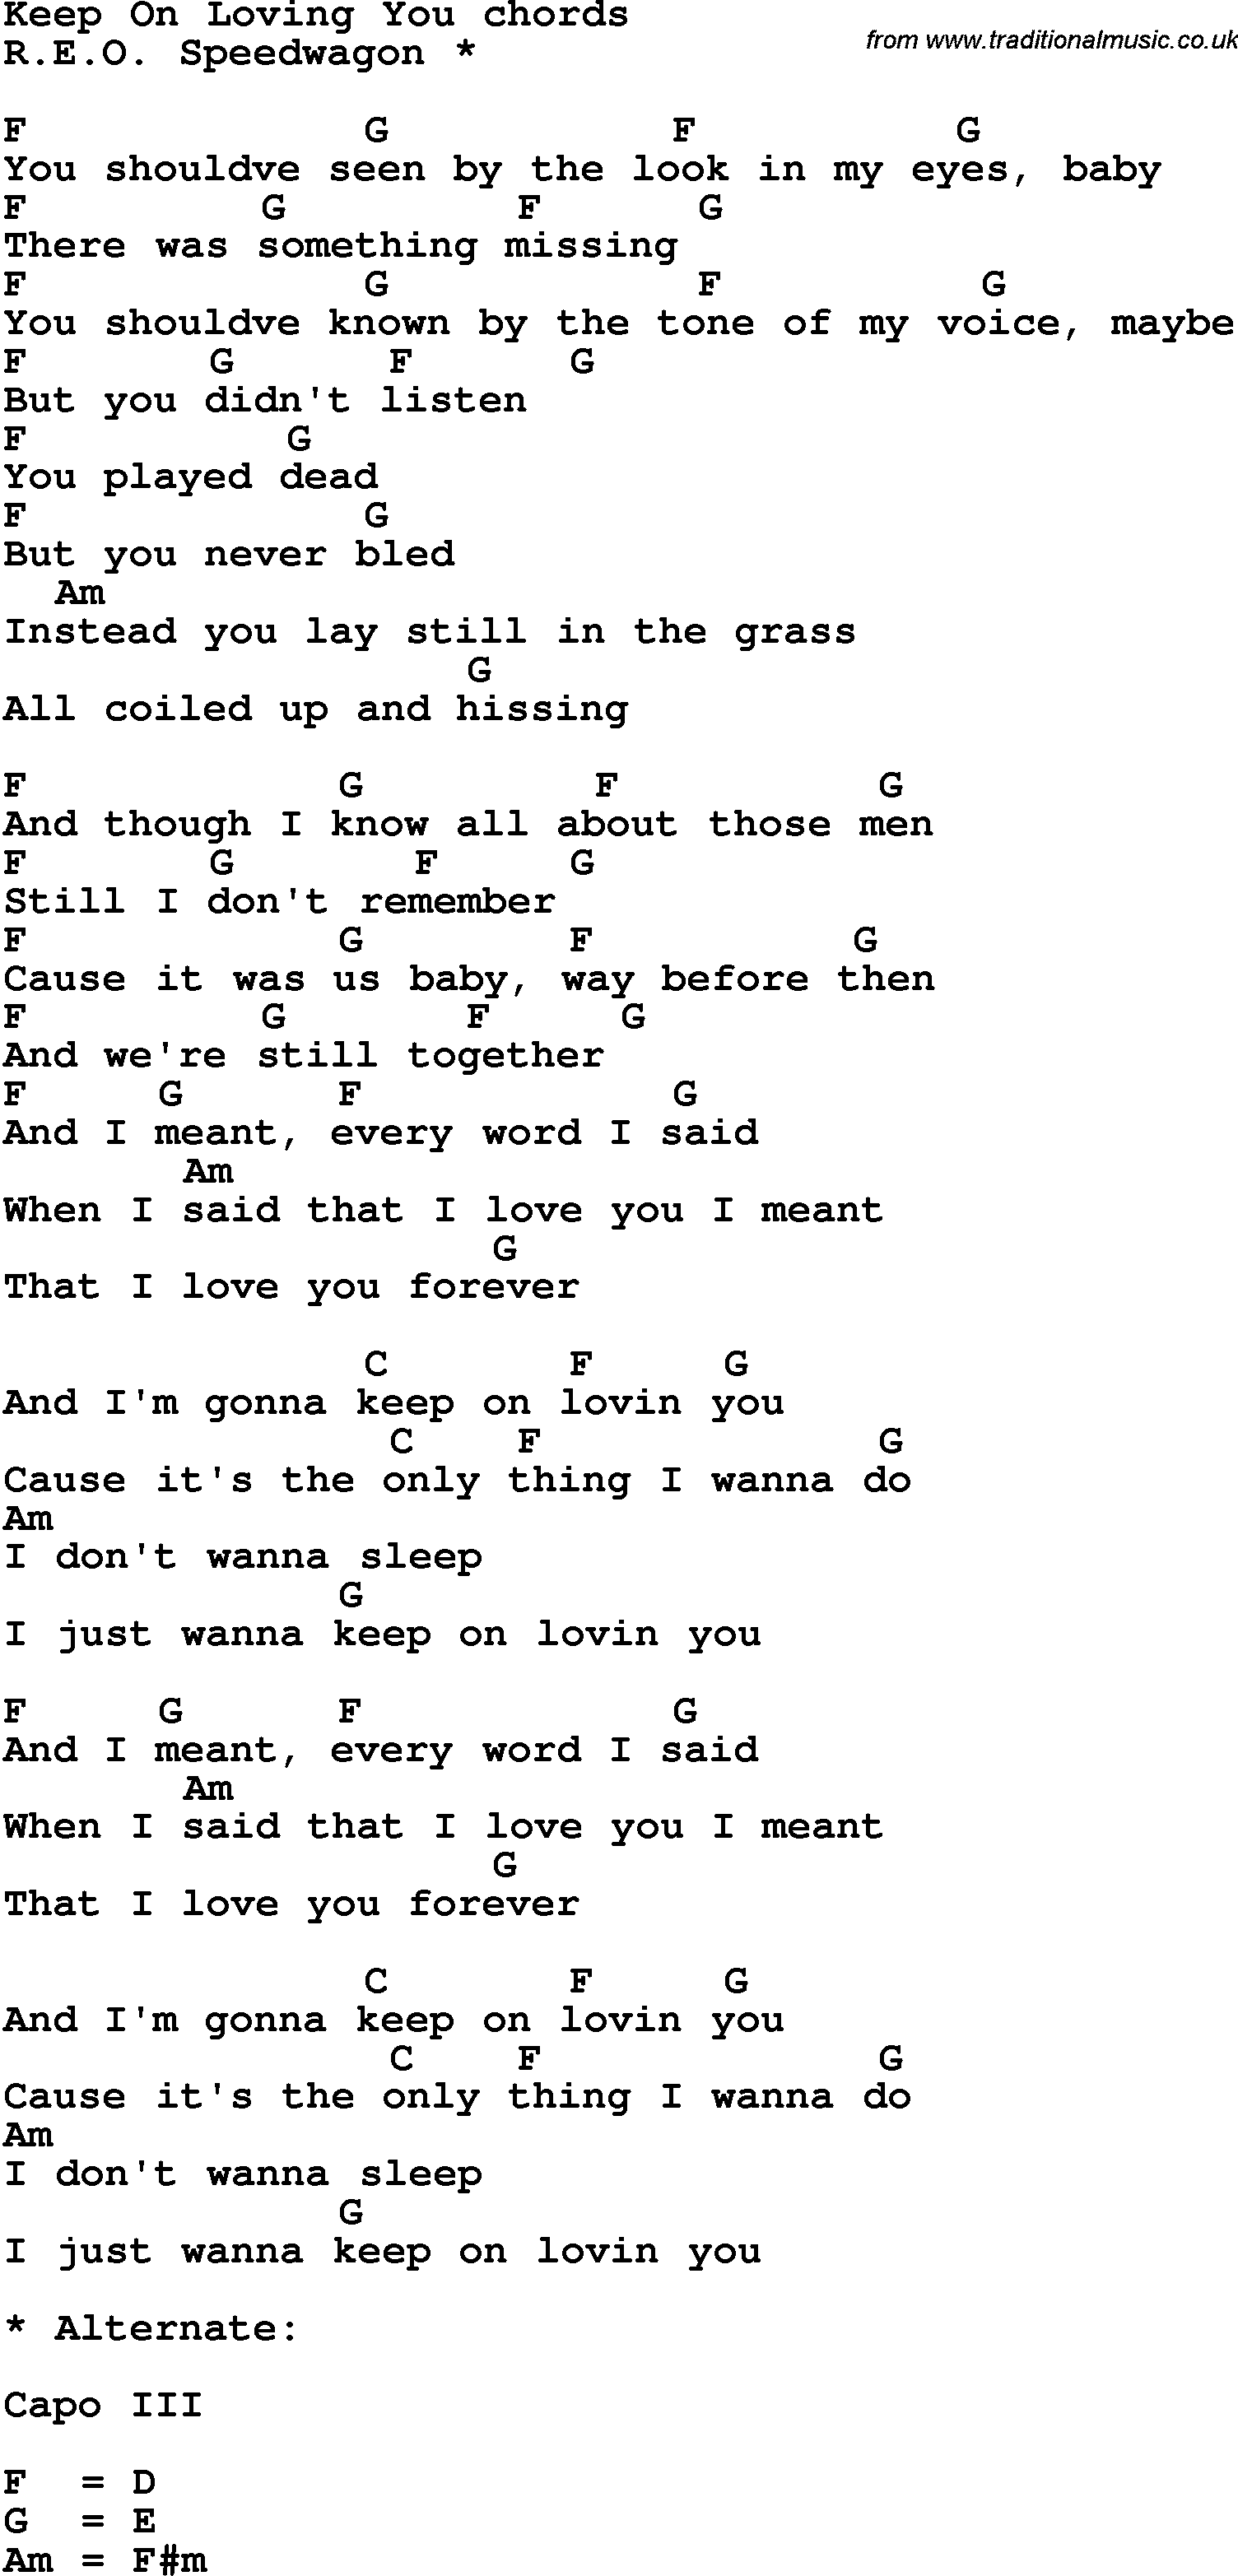 Song Lyrics with guitar chords for Keep On Loving You